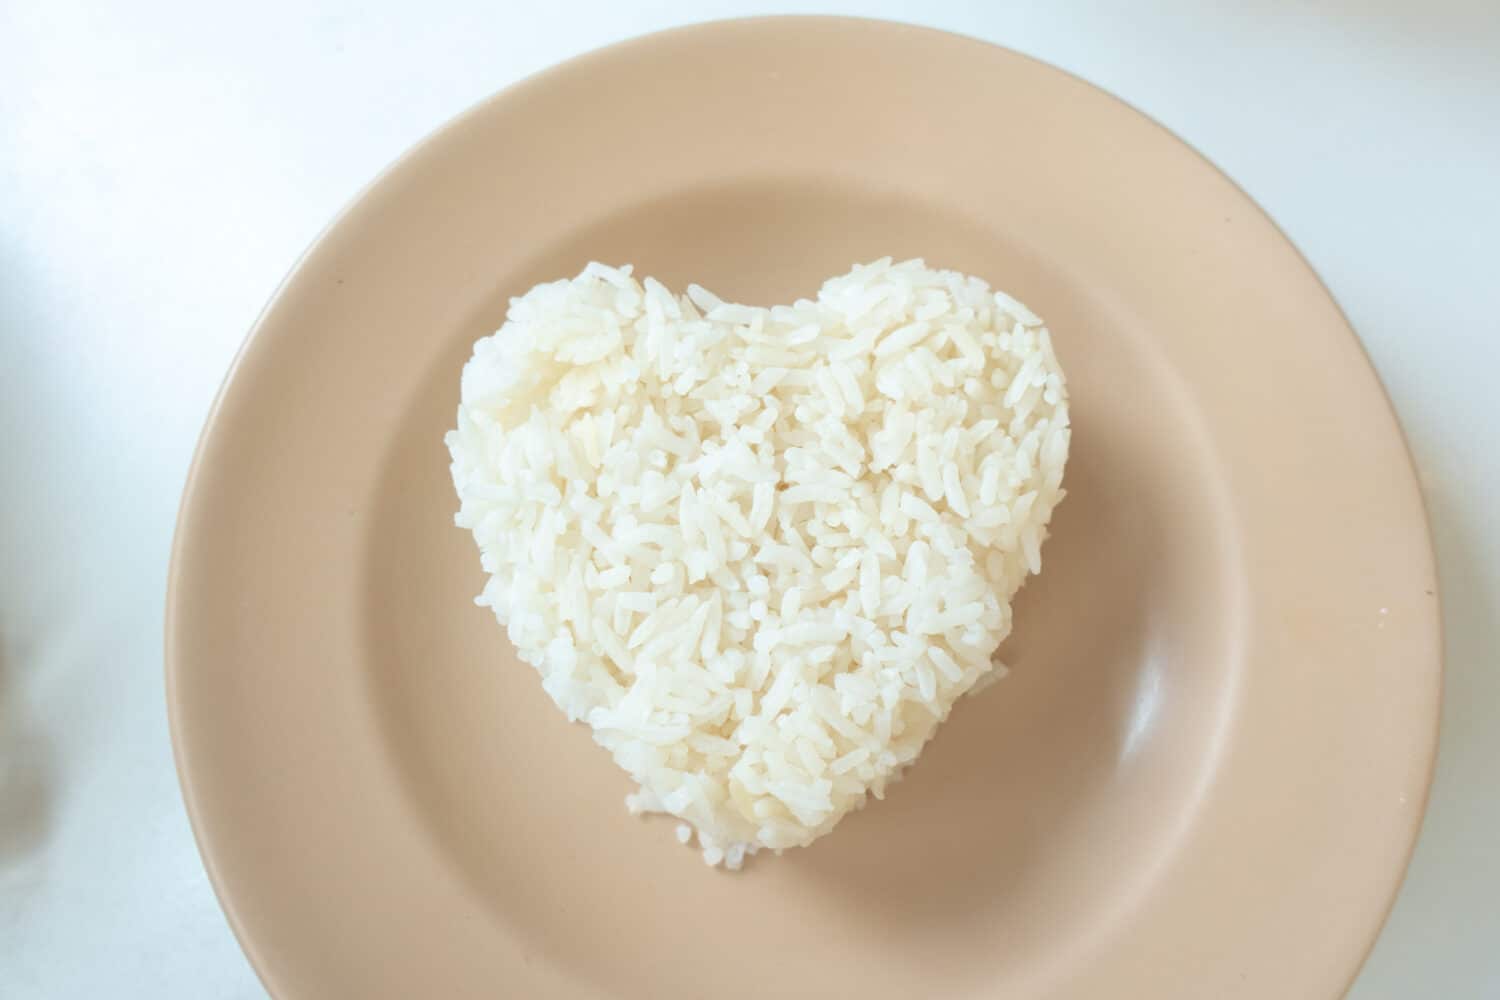 Heart shaped steamed rice served in small pink plate. Food preparing for meal concept.